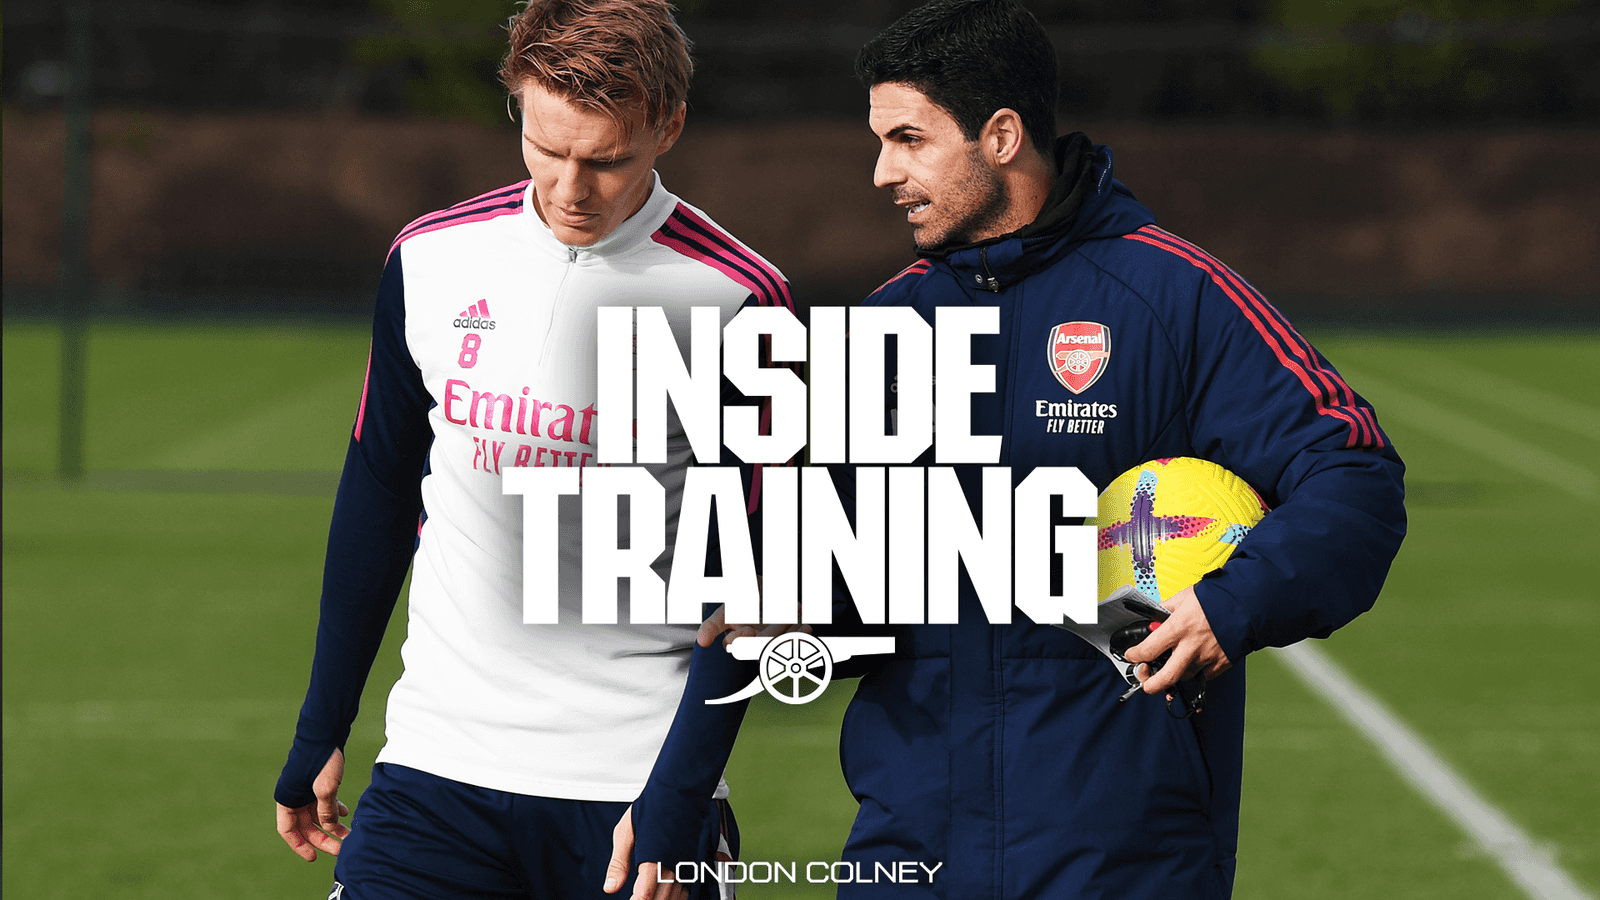 Go Inside Training ahead of our Everton trip